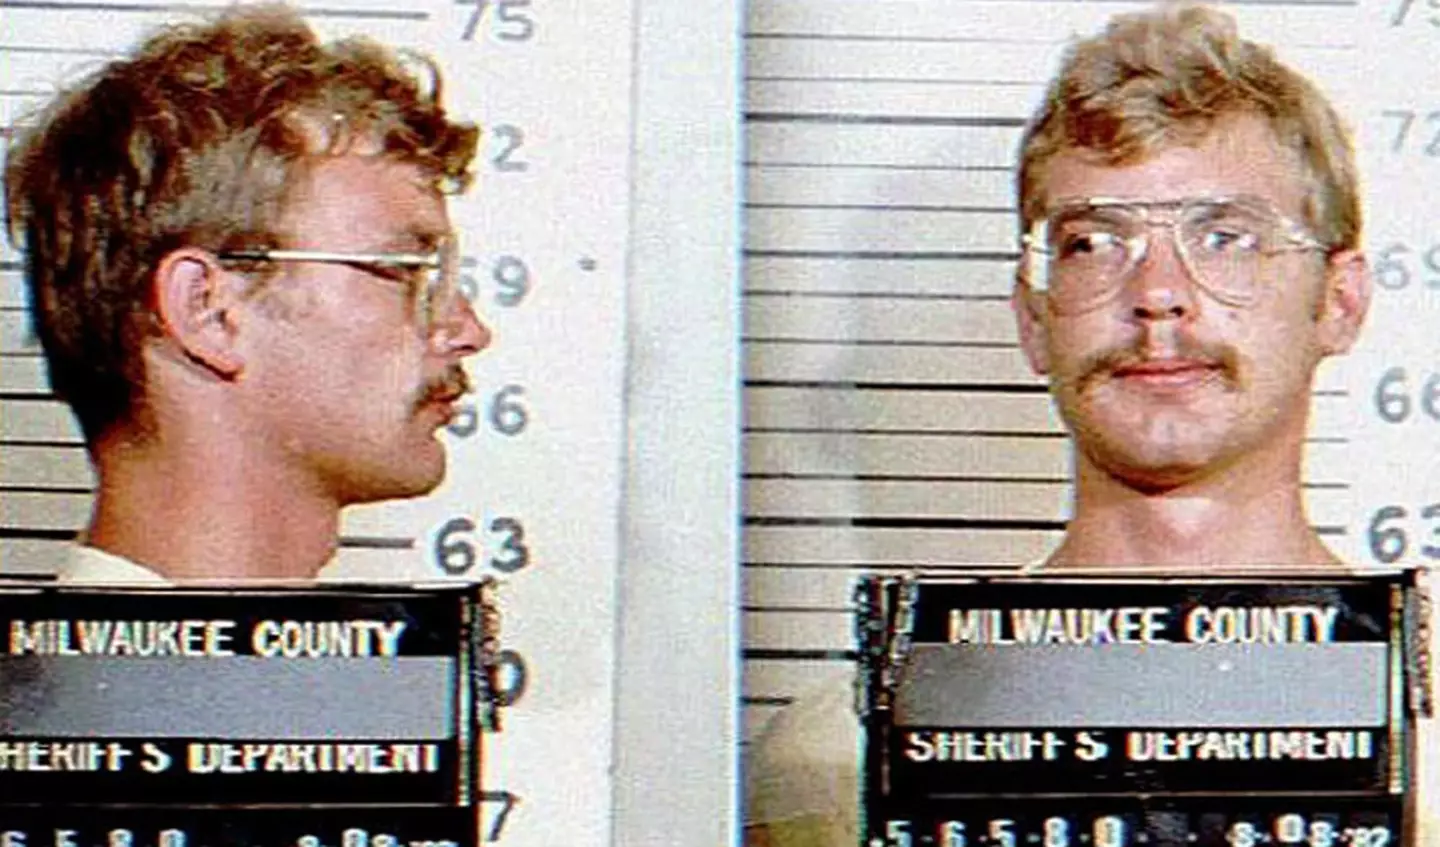 Dahmer was able to evade justice for more than 10 years.